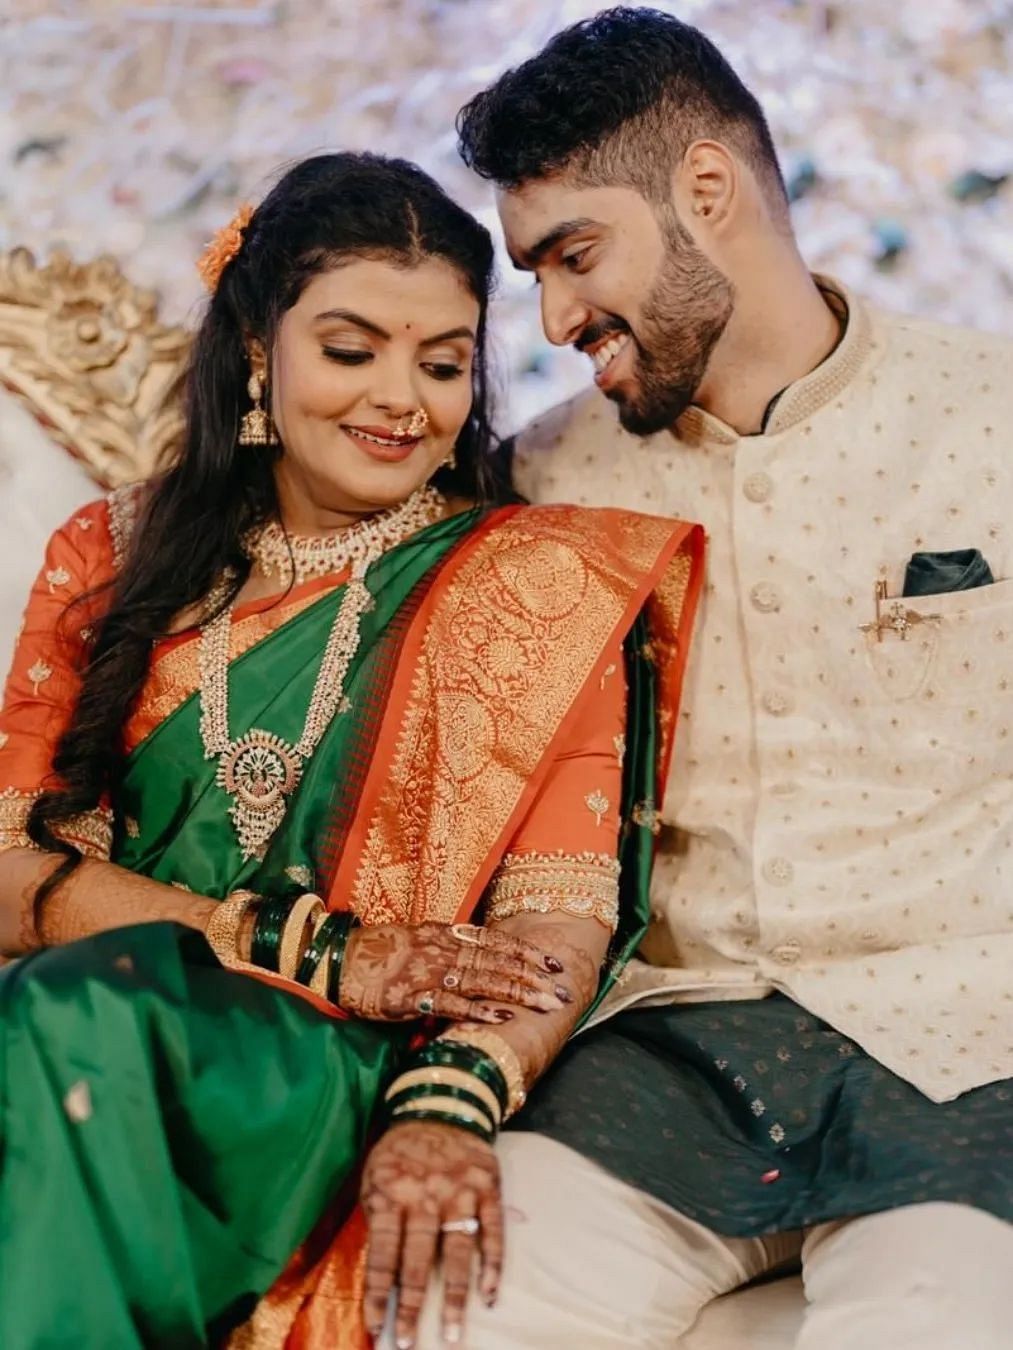 Marathi actor Tejashree announced her engagement to New Zealand-based banker Rohan Singh on social media. The intimate ceremony was held in Mumbai. 